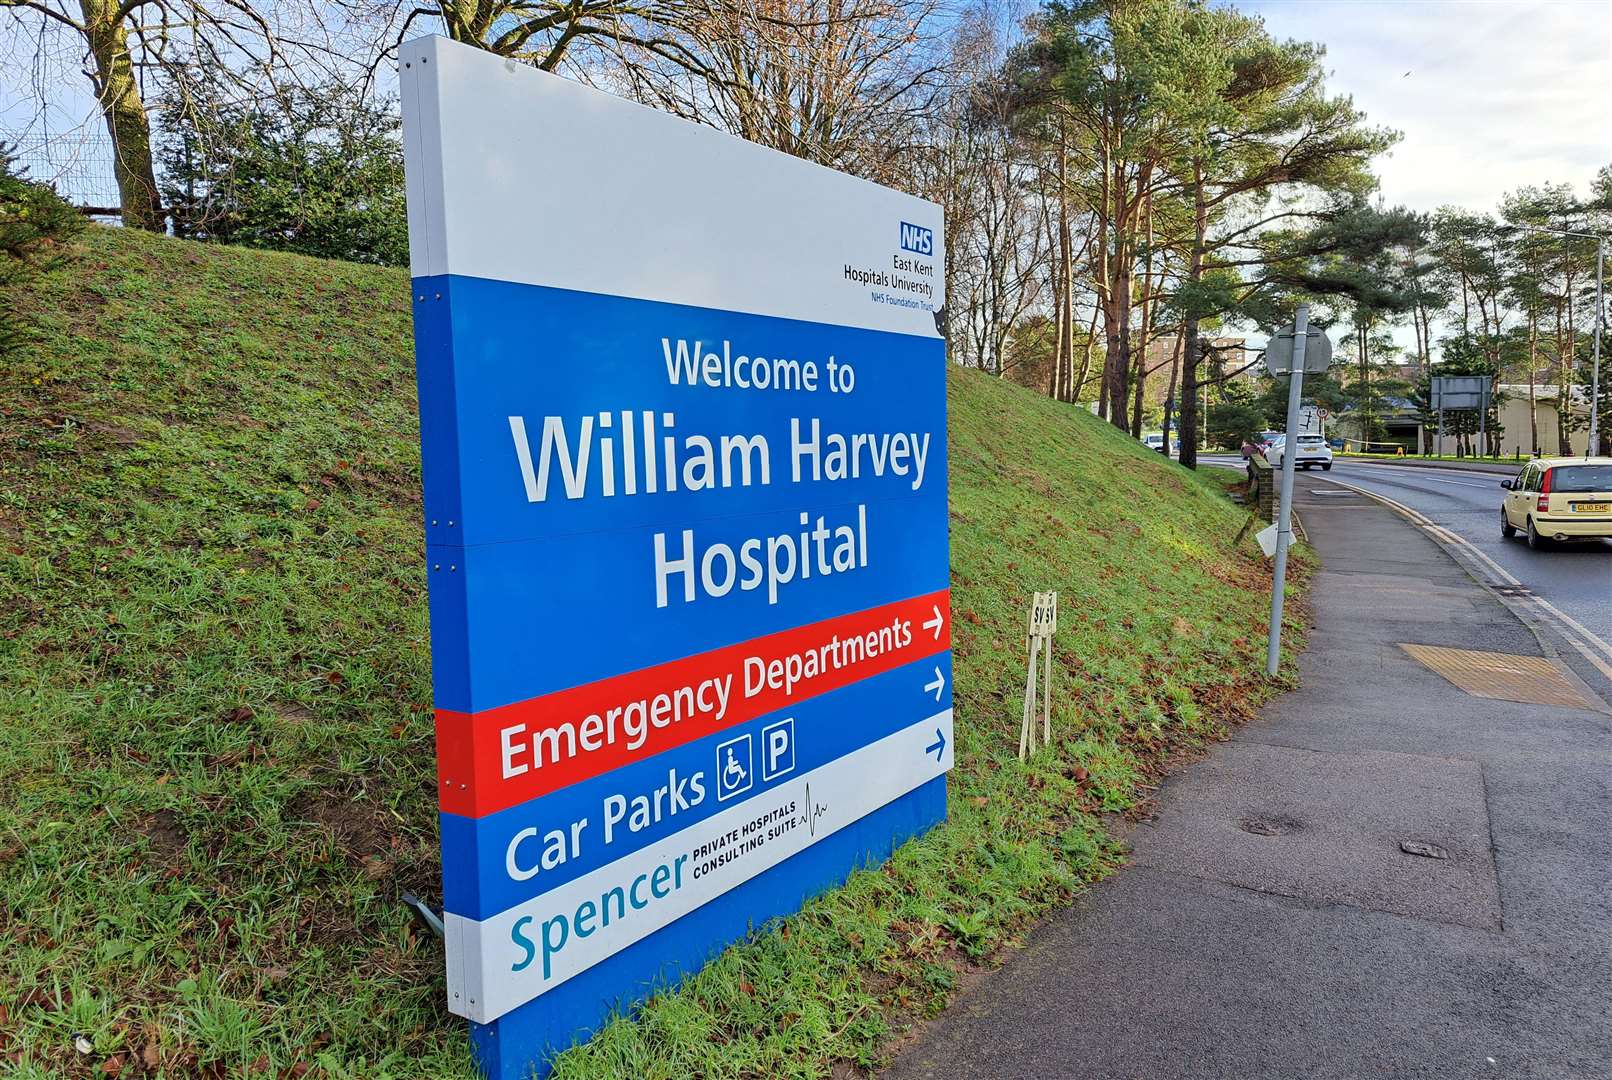 The William Harvey Hospital is part of the East Kent Hospitals Trust